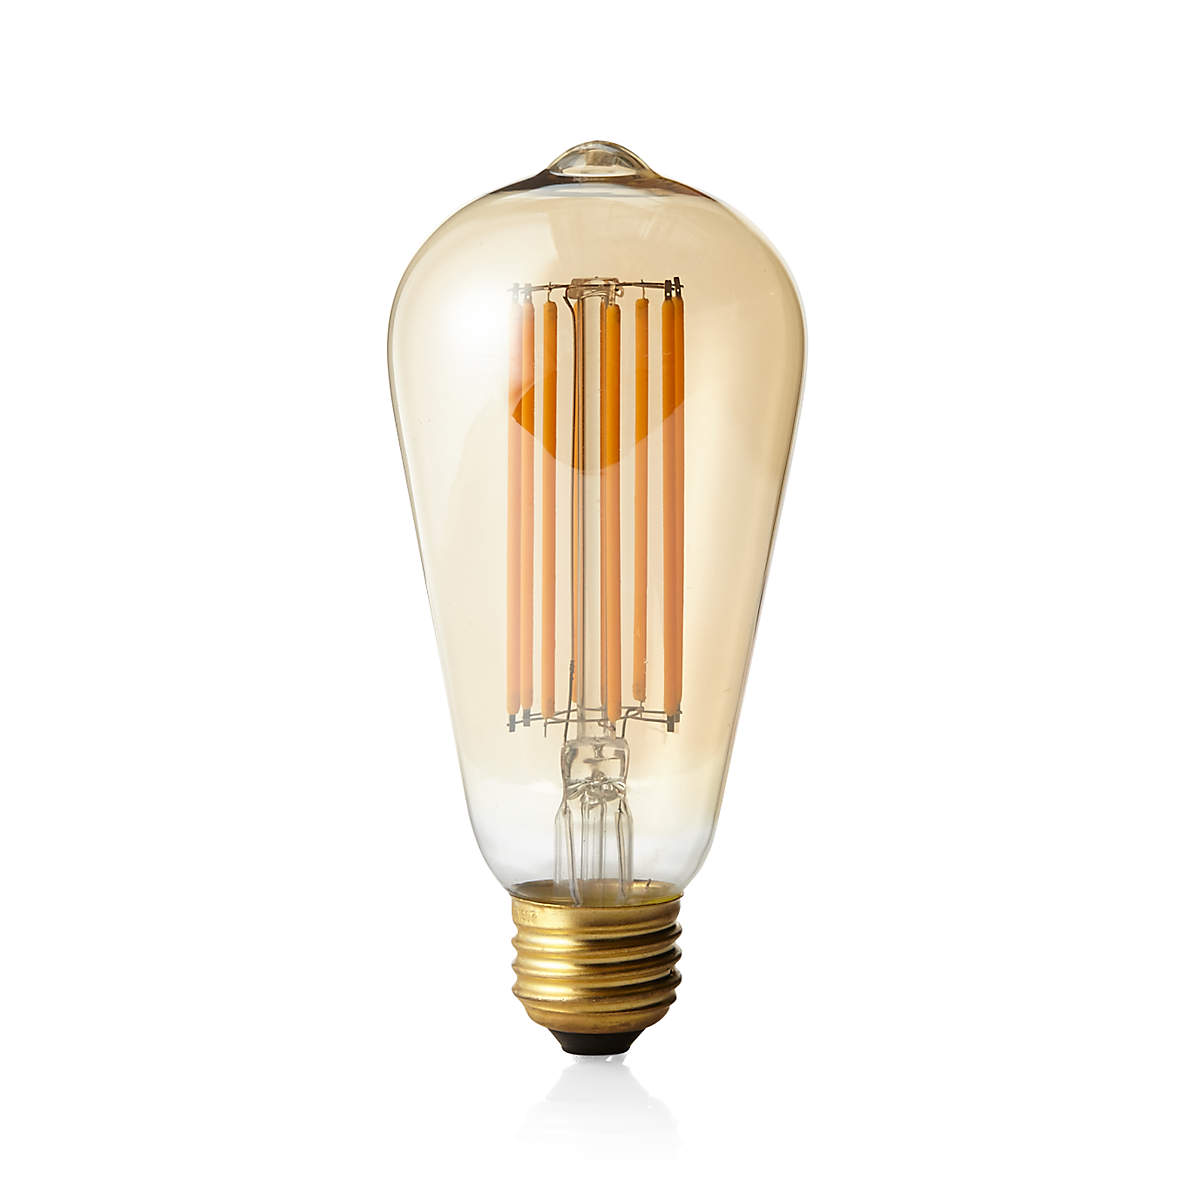 3-Pack 40W S21 Edison Marconi Antique Reproduction Light Bulb with Squirrel Cage Filament 